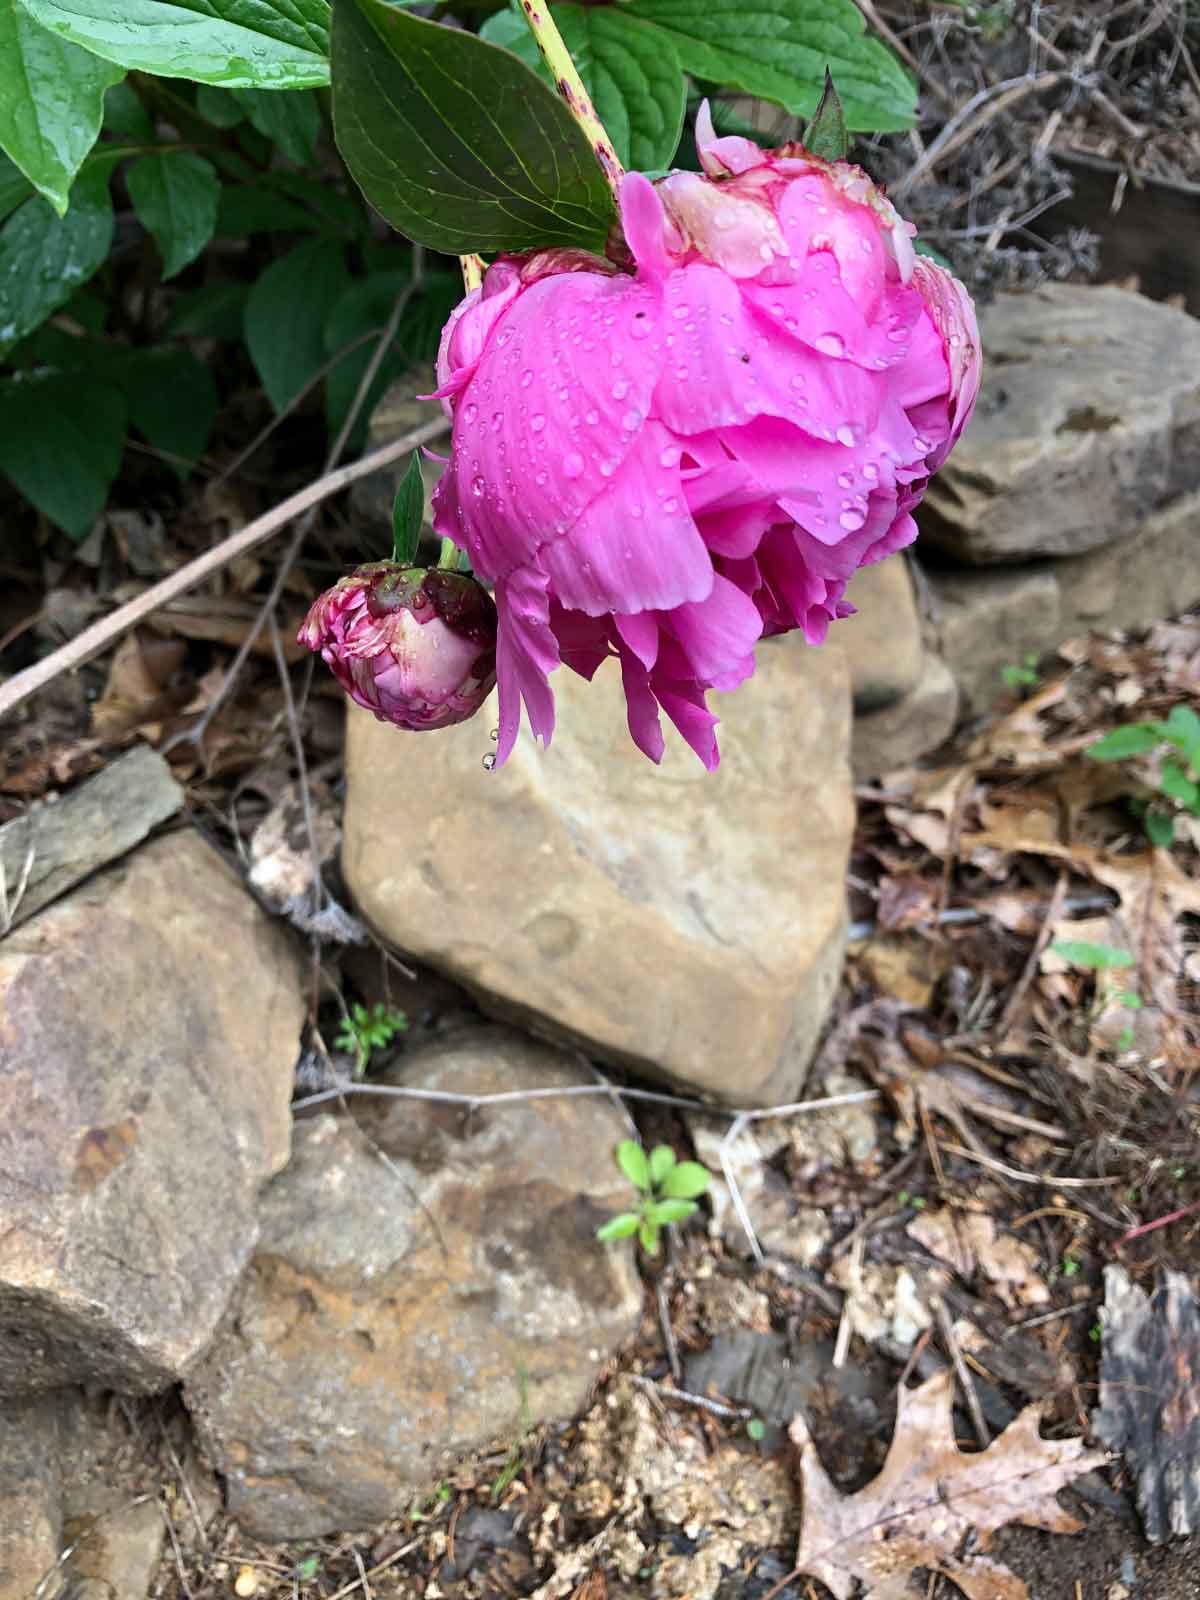 As an Ozark nature artist, I love beautiful gardens. This peony helps to create some colorful beauty, for sure!